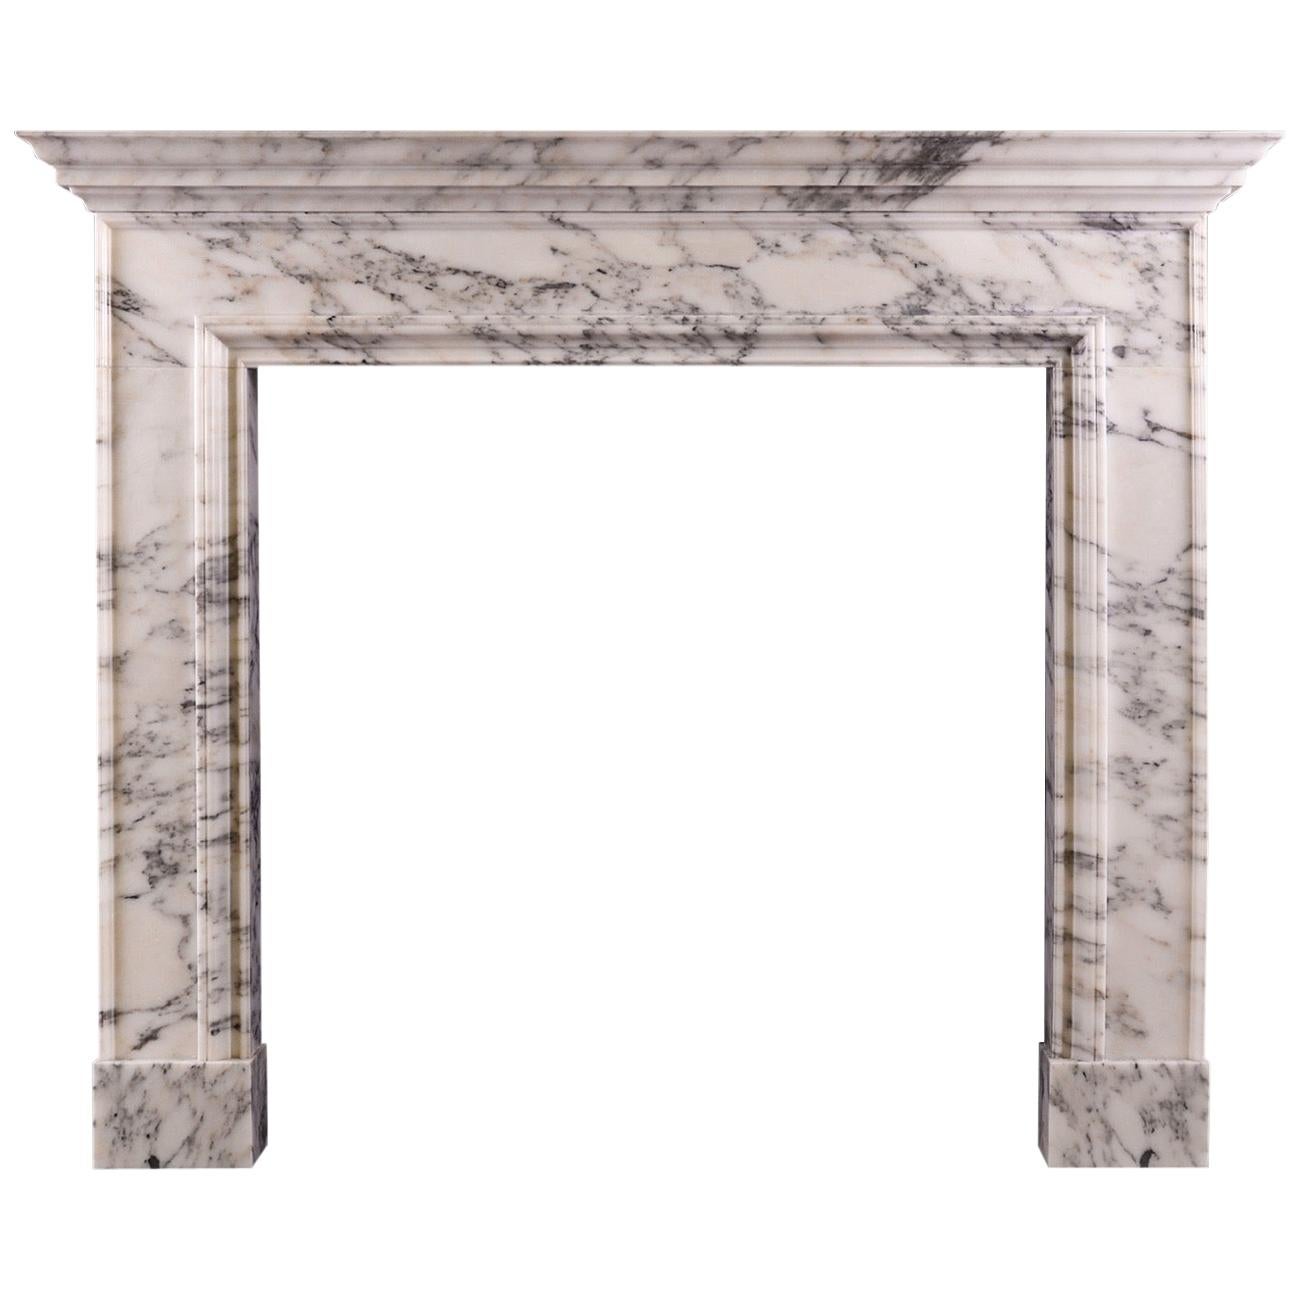 Simple Italian Arabescato Marble Fireplace of Architectural Form